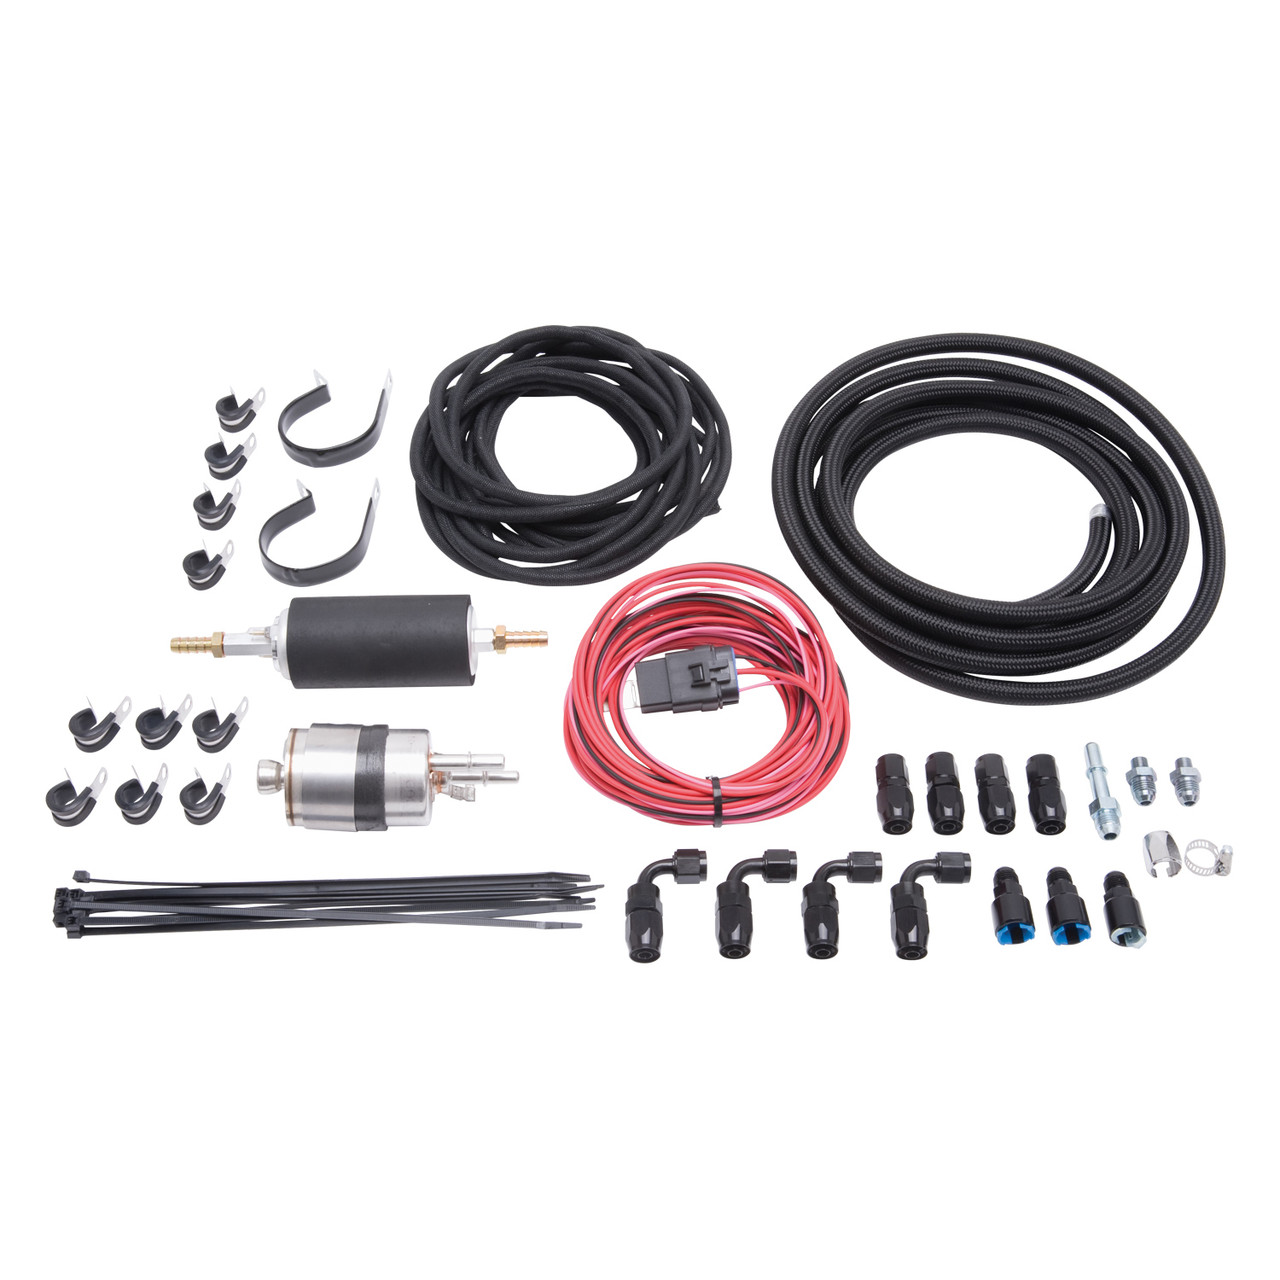 Russell GM LS Swap Complete Universal EFI Fuel System Kit 641523